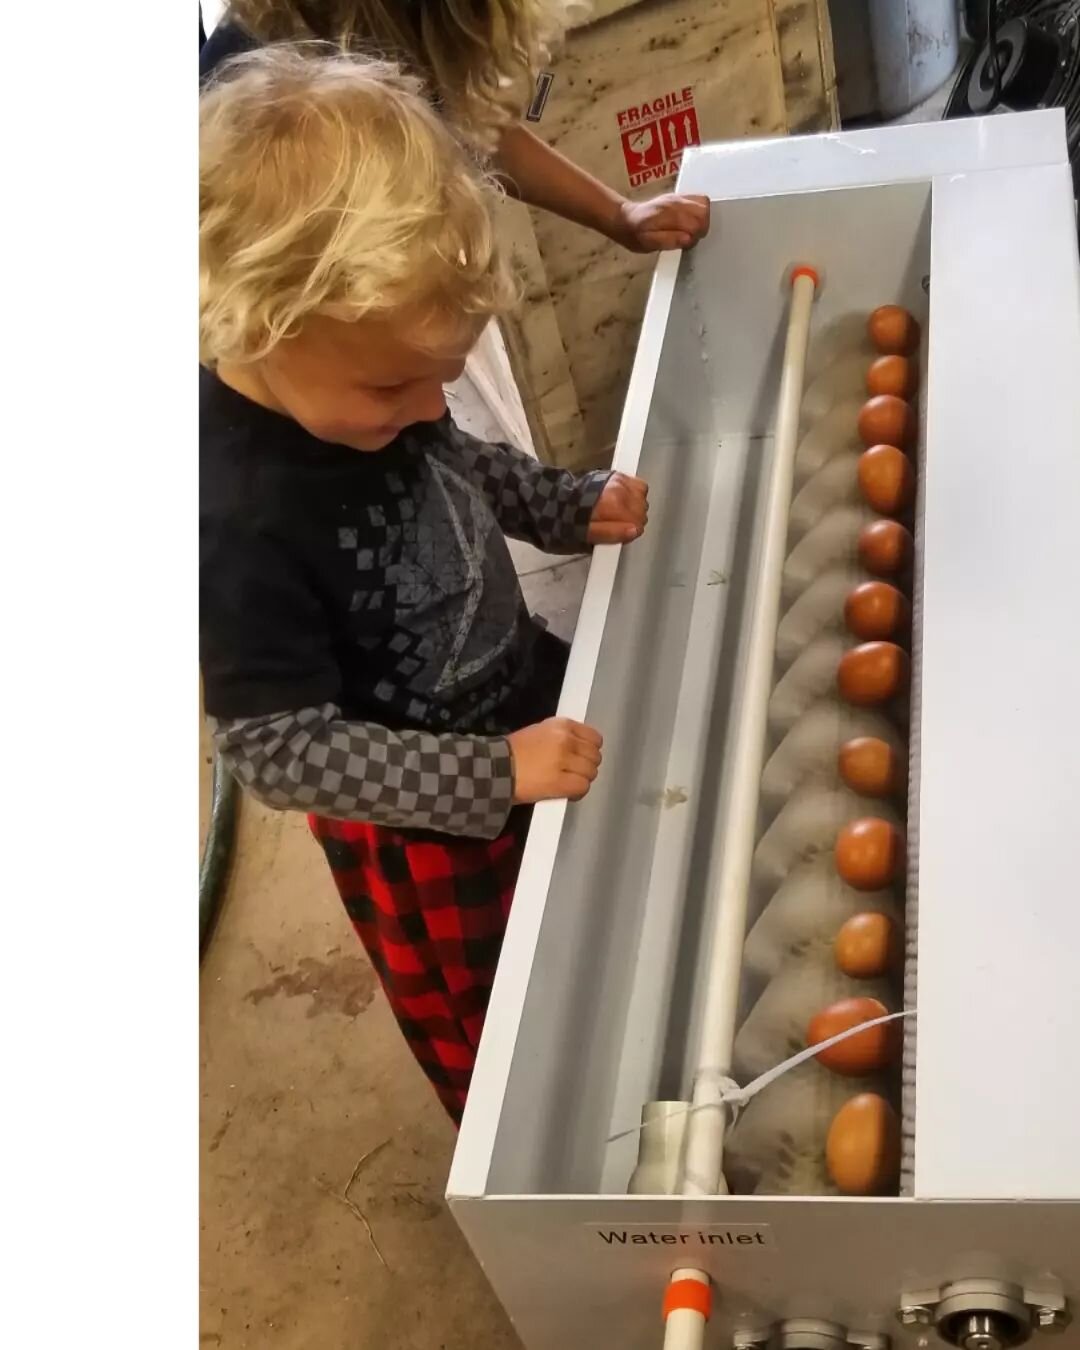 Game changer in the egg washing department.
So much fun for toddlers too.